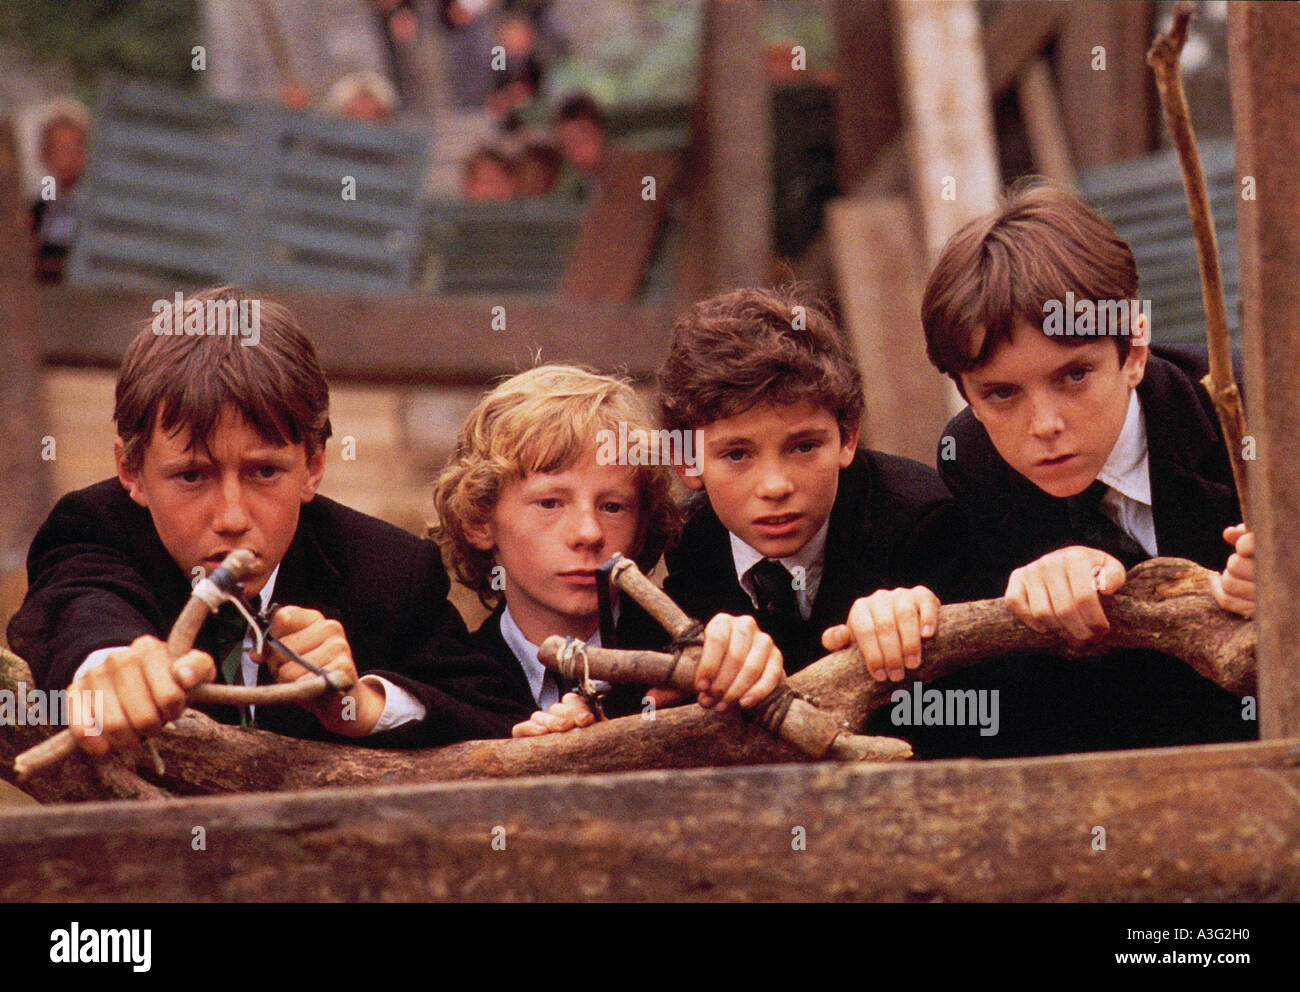 WAR OF THE BUTTONS  1994  Warner film about boys in rural Ireland Stock Photo